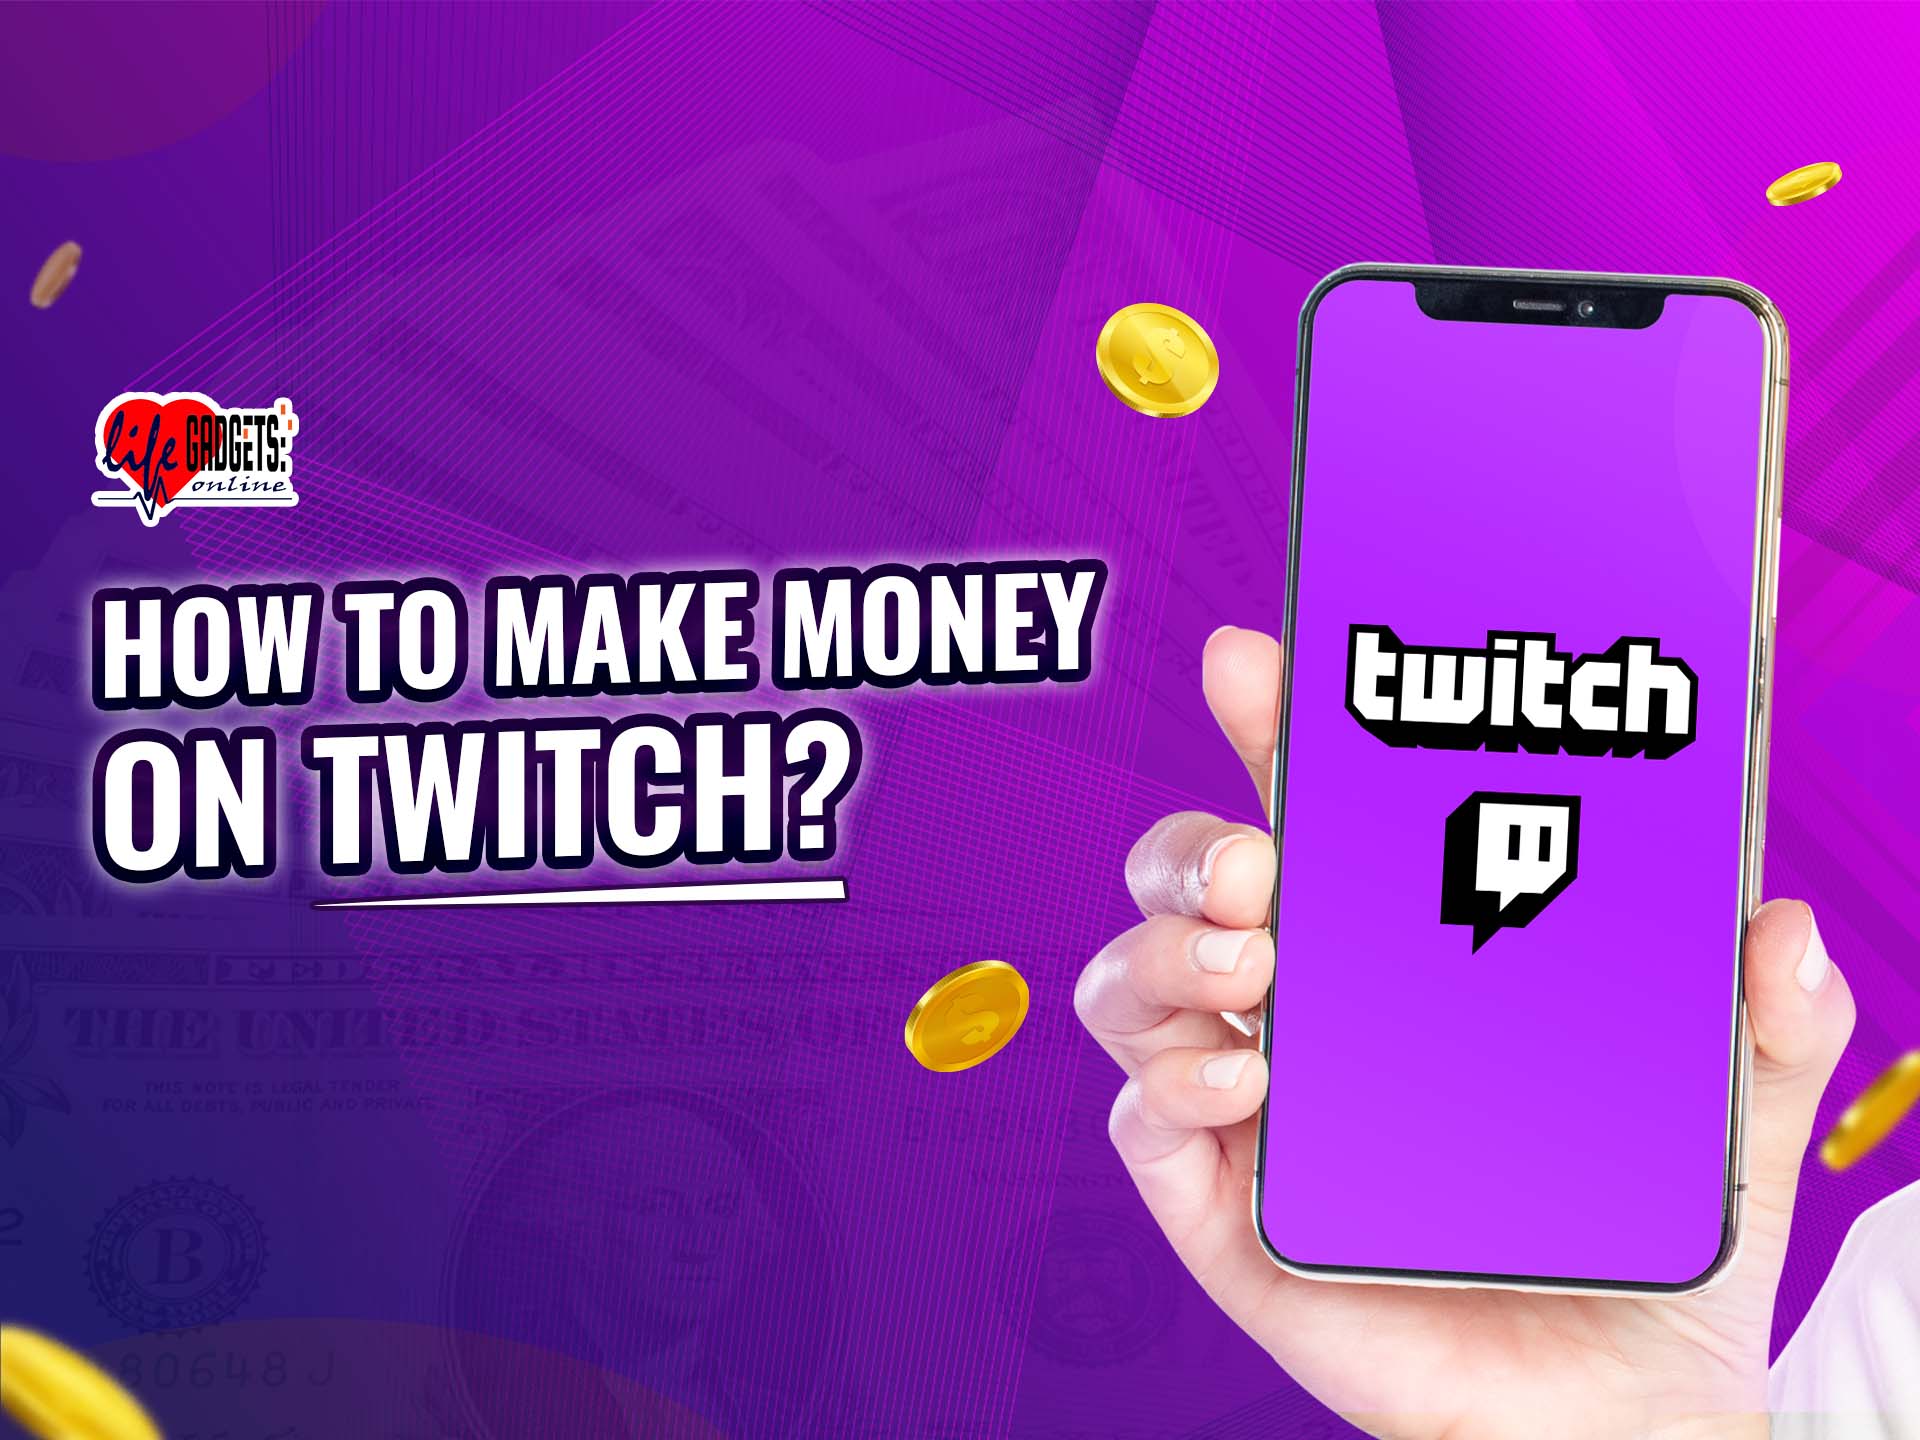 How To Make Money On Twitch?